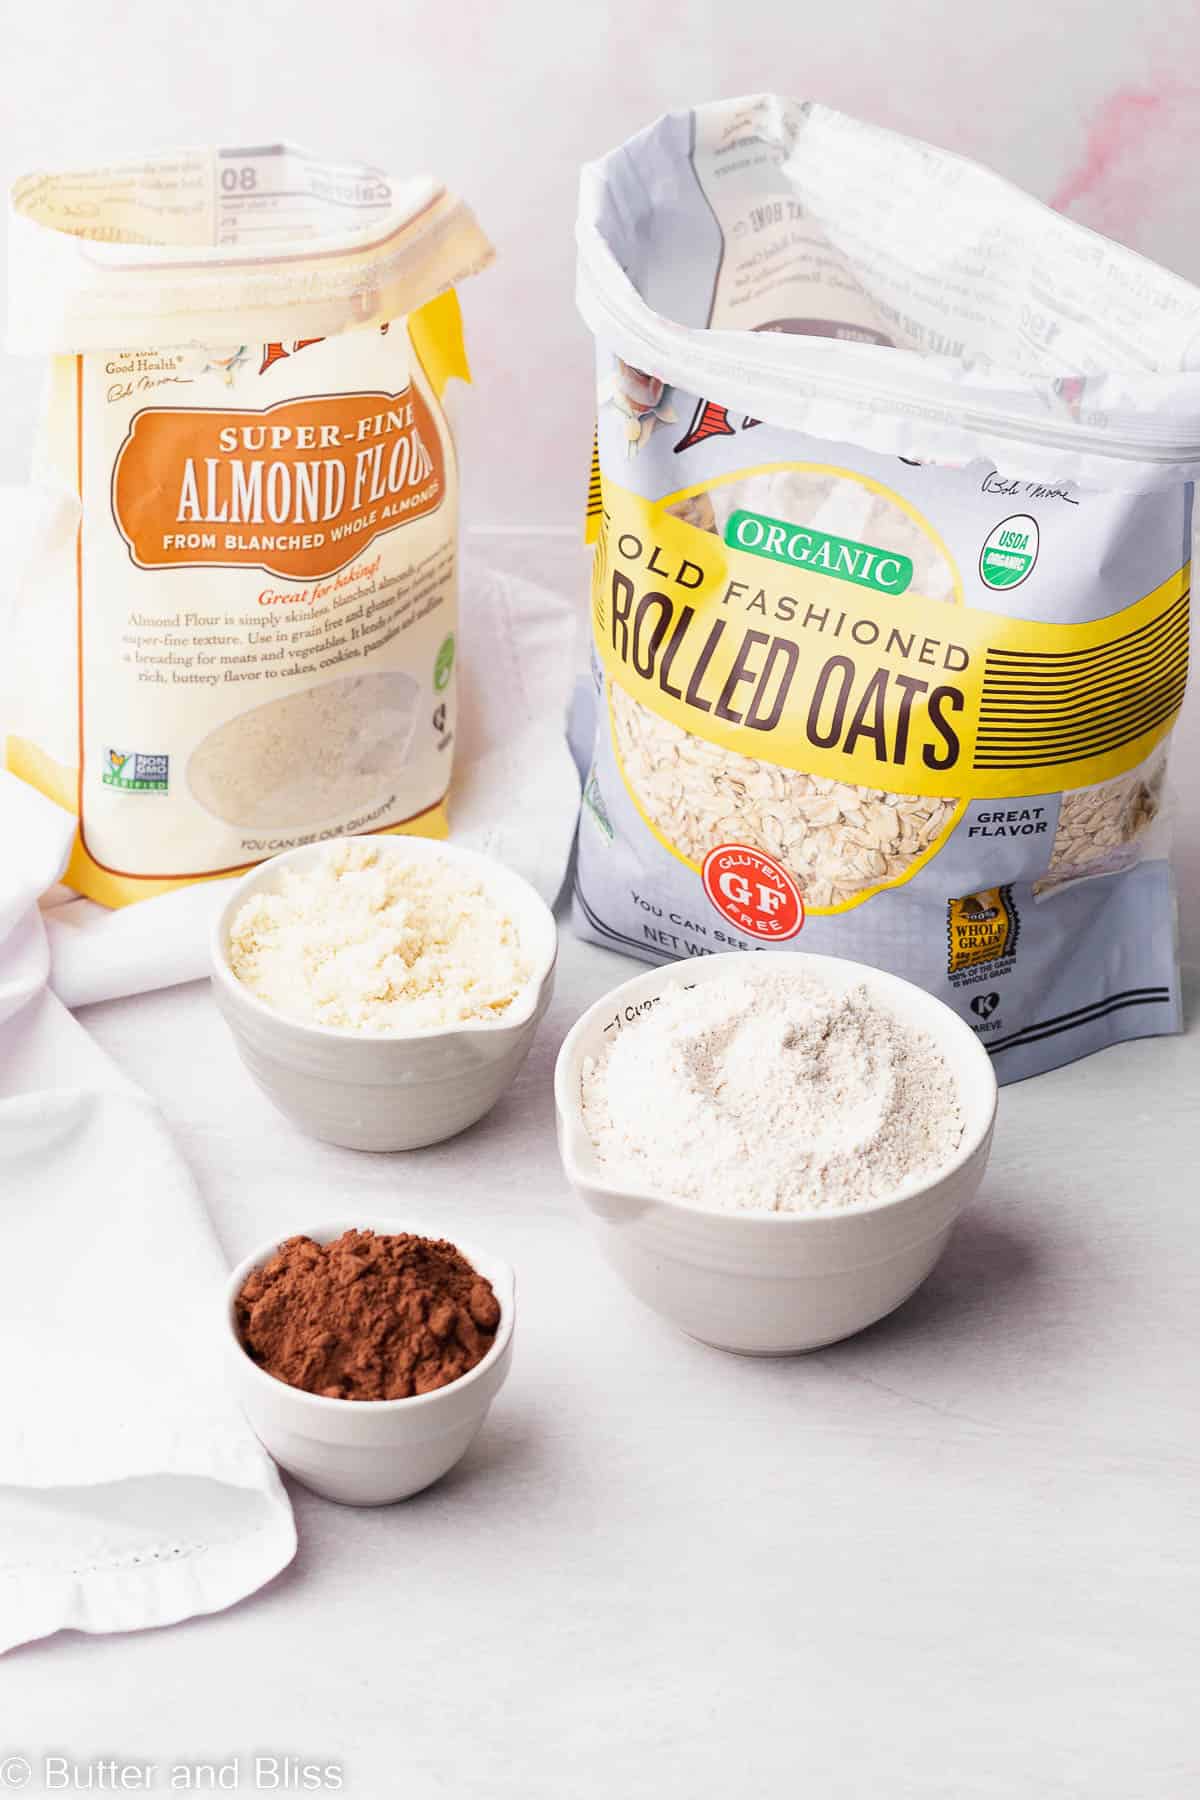 Gluten free flours in a bag on a a table with a bowl of cocoa powder.